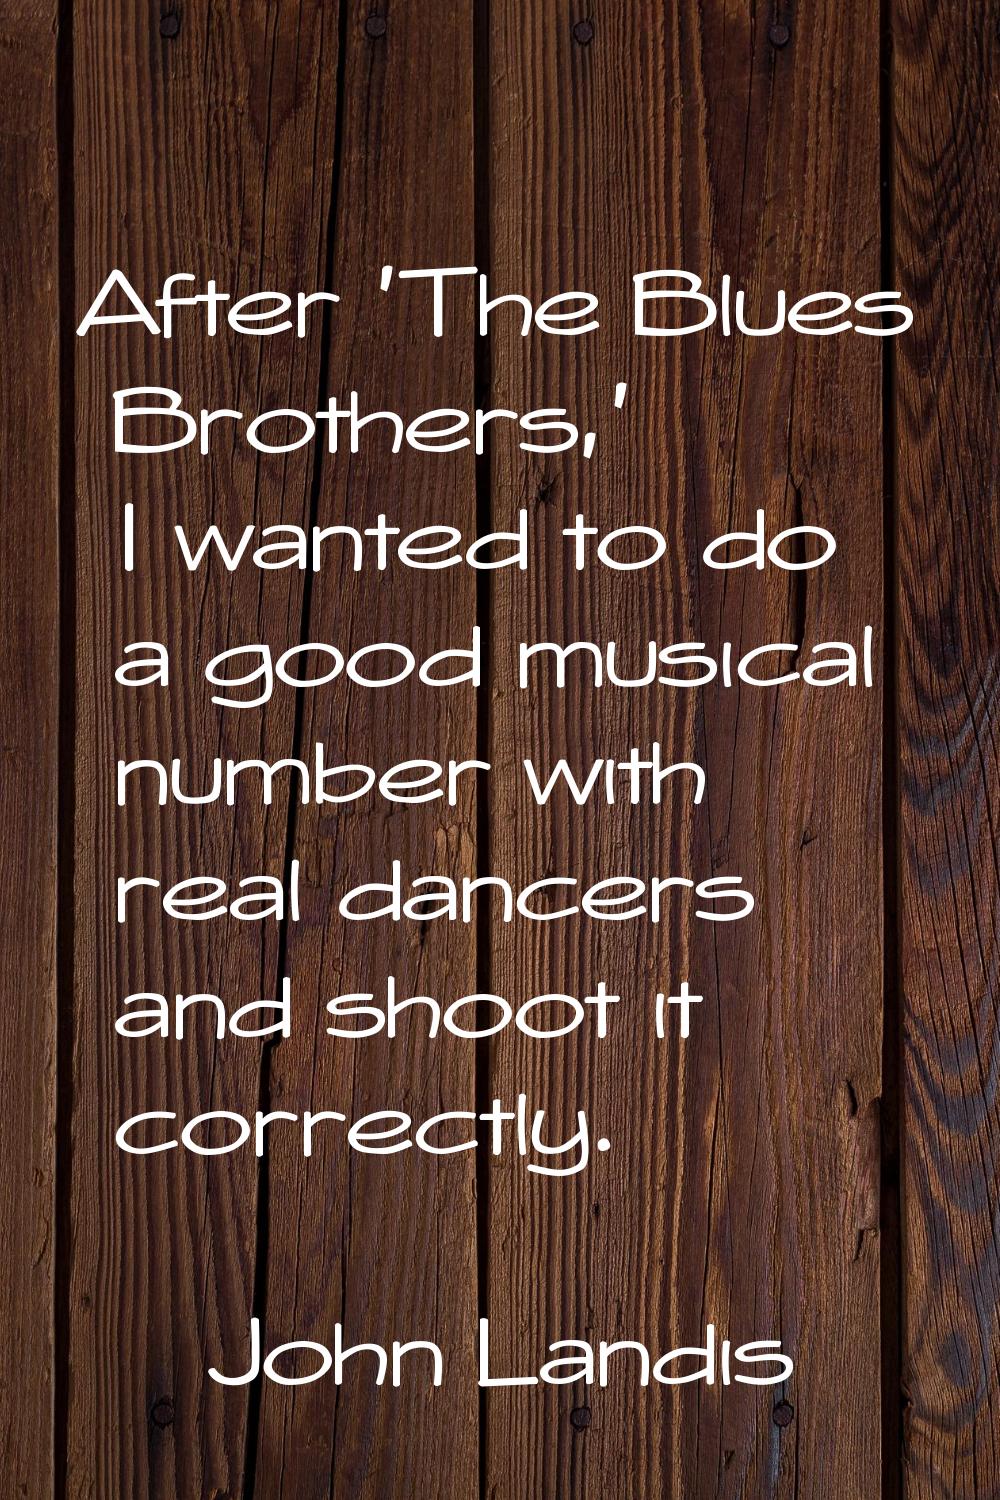 After 'The Blues Brothers,' I wanted to do a good musical number with real dancers and shoot it cor